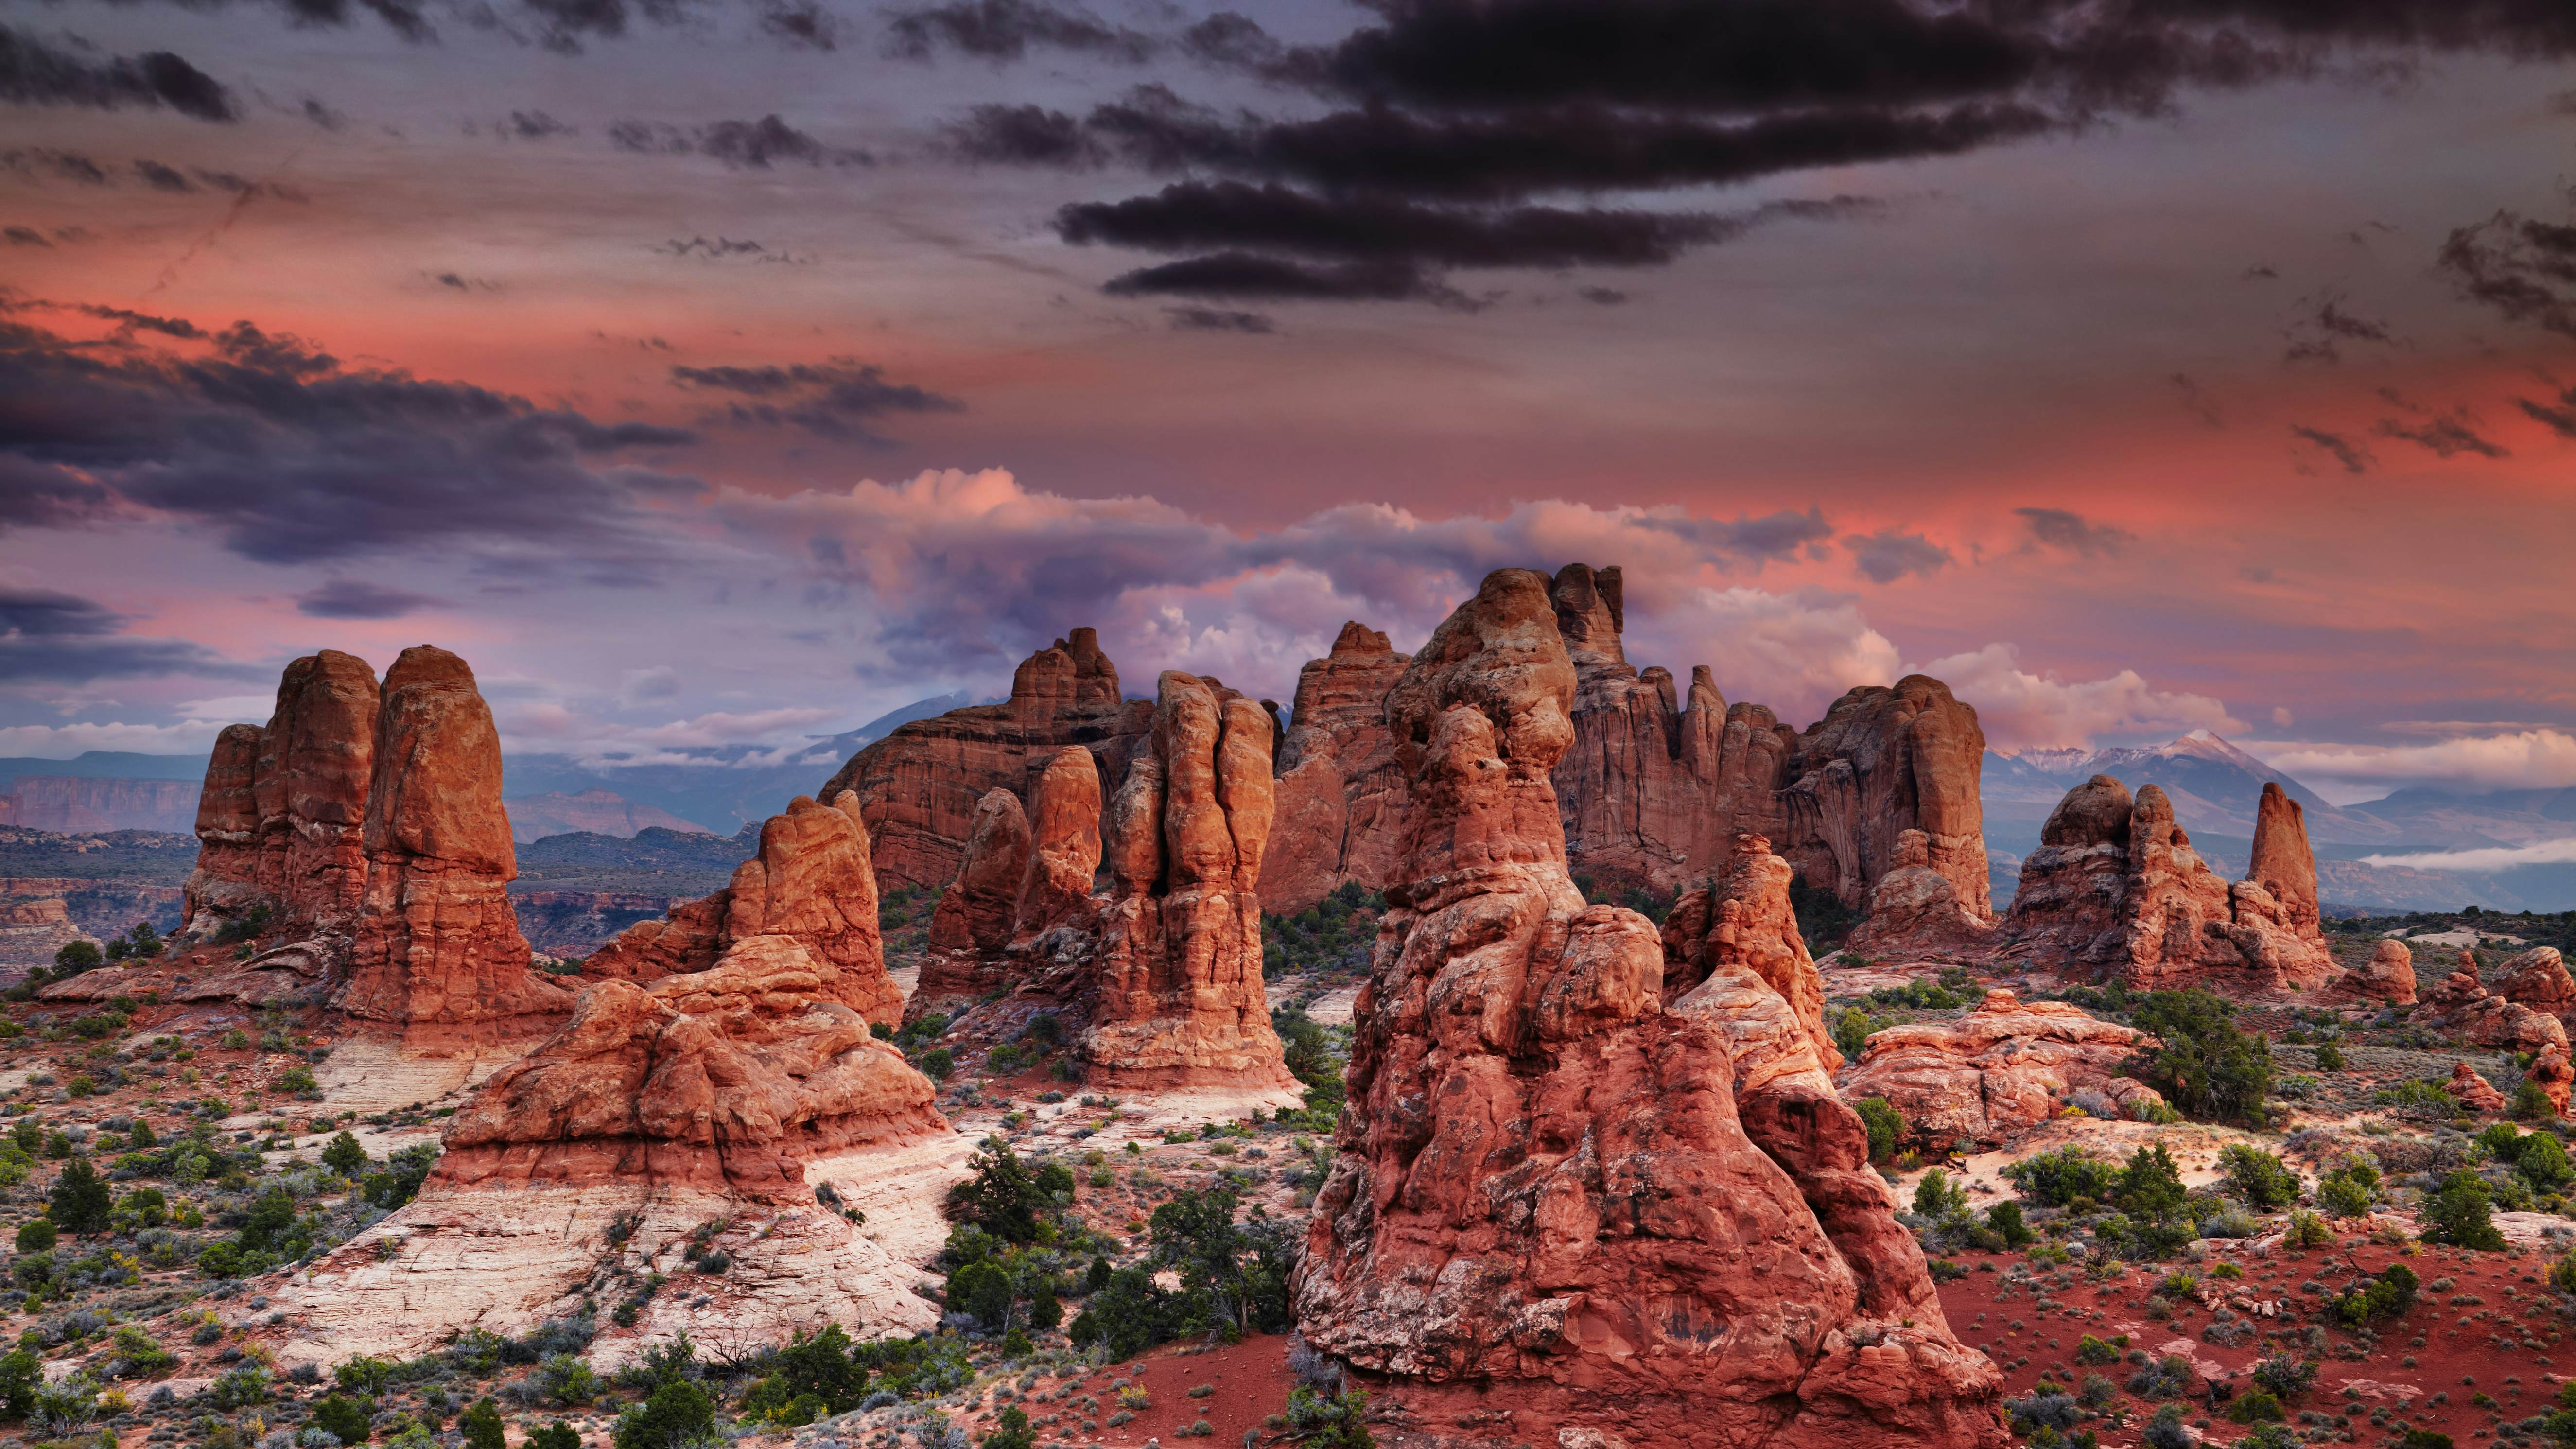 Colorful sunset in Arches National Park, Utah, USA